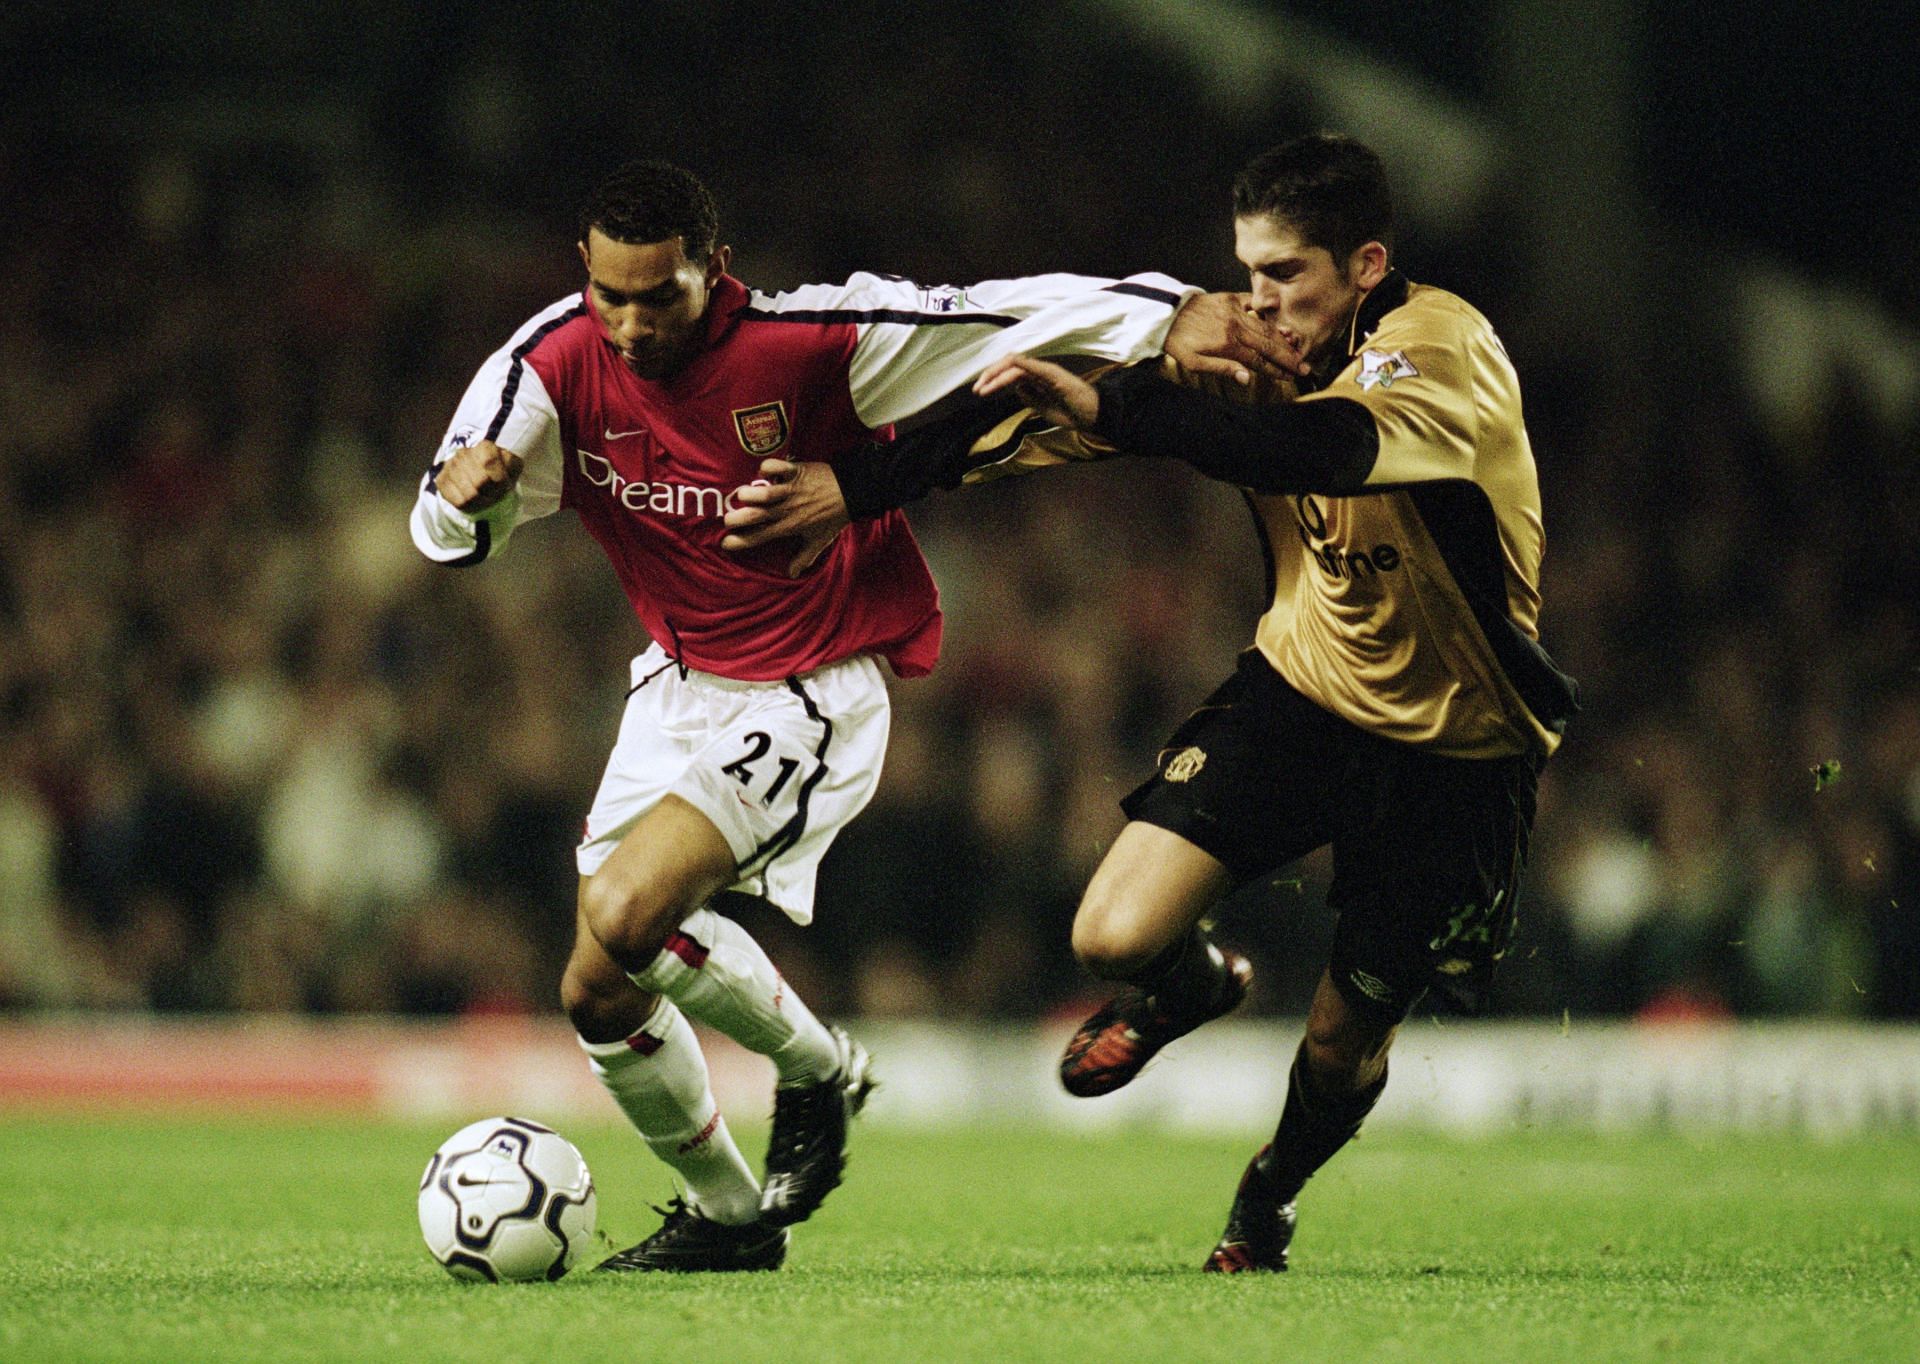 Jermaine Pennant broke Gerry Ward&#039;s long-standing record of being the youngest Arsenal debutant